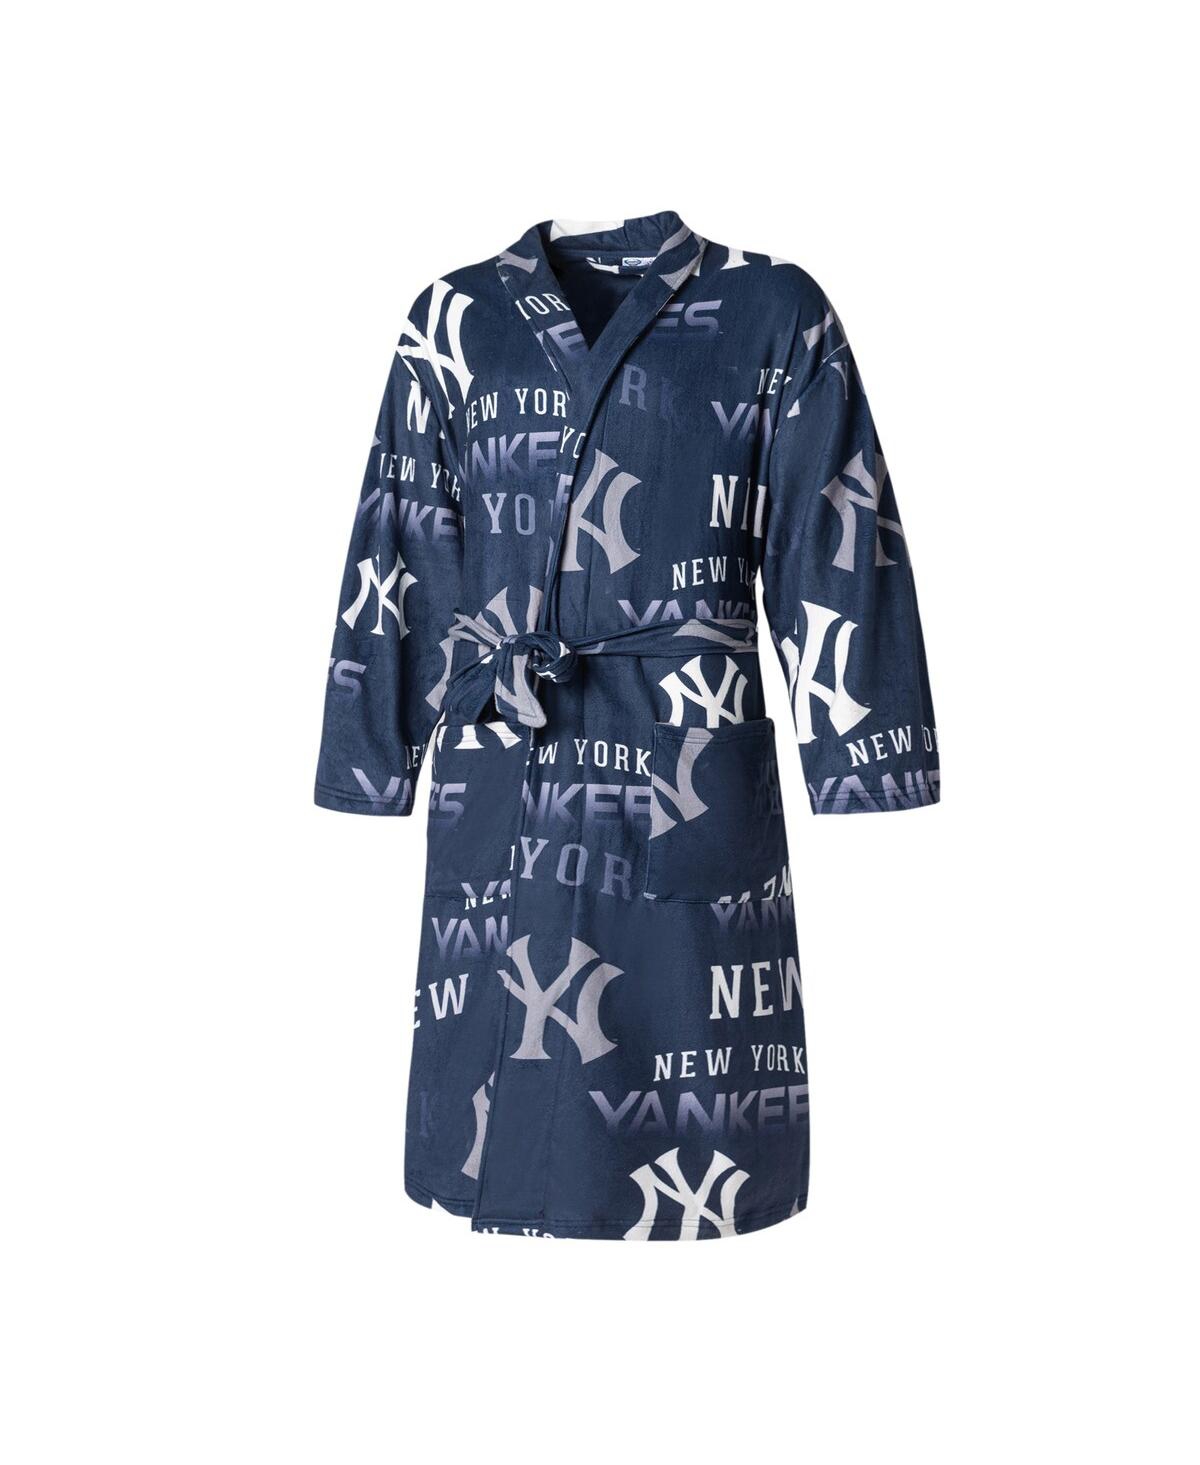 CONCEPTS SPORT MEN'S CONCEPTS SPORT NAVY NEW YORK YANKEES WINDFALL MICROFLEECE ALLOVER ROBE